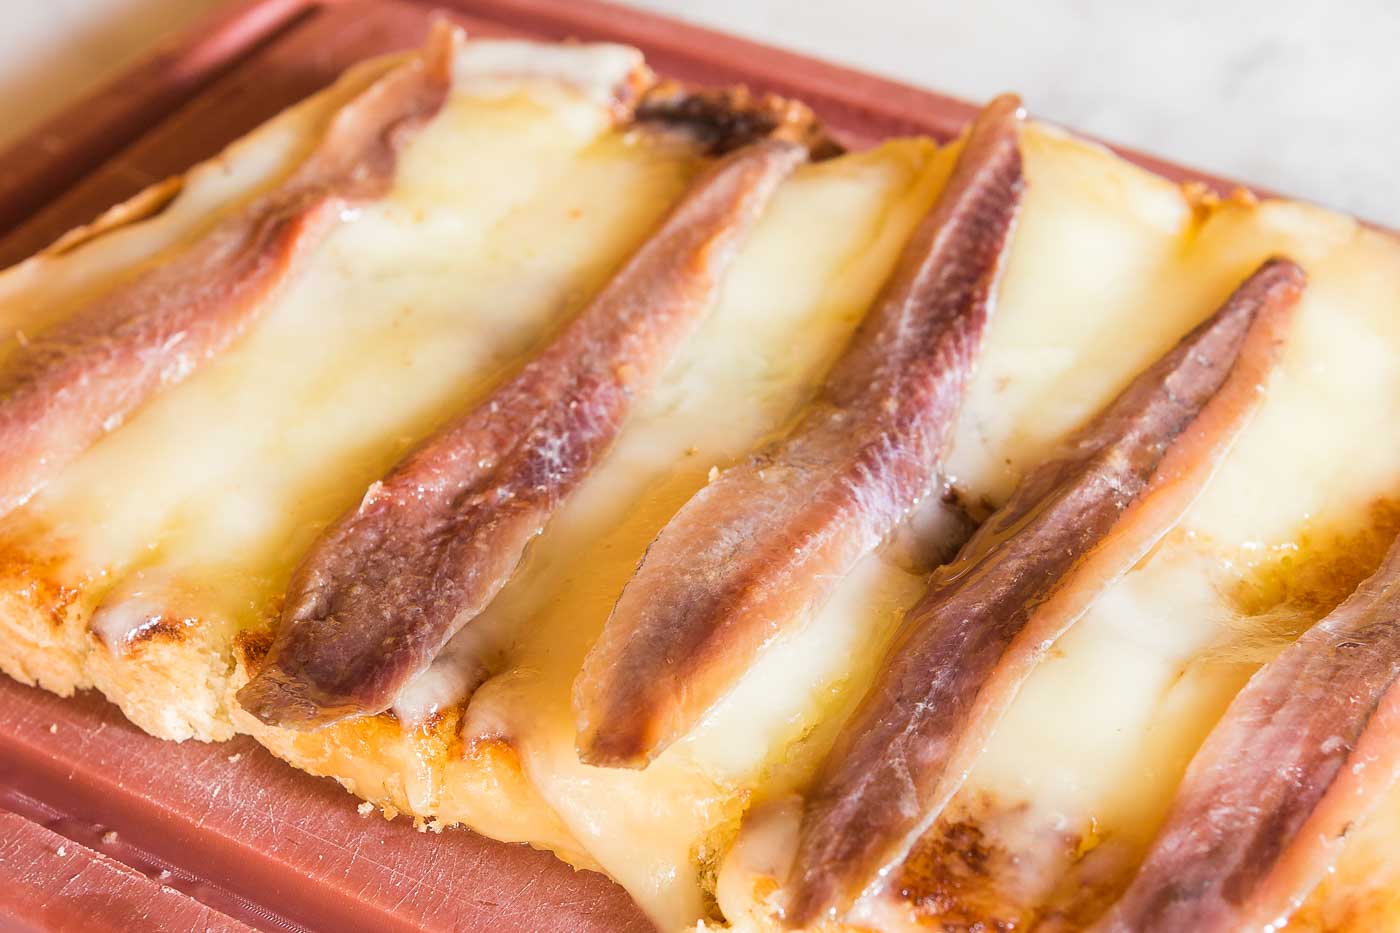 Cheese from Badajoz & Anchovies